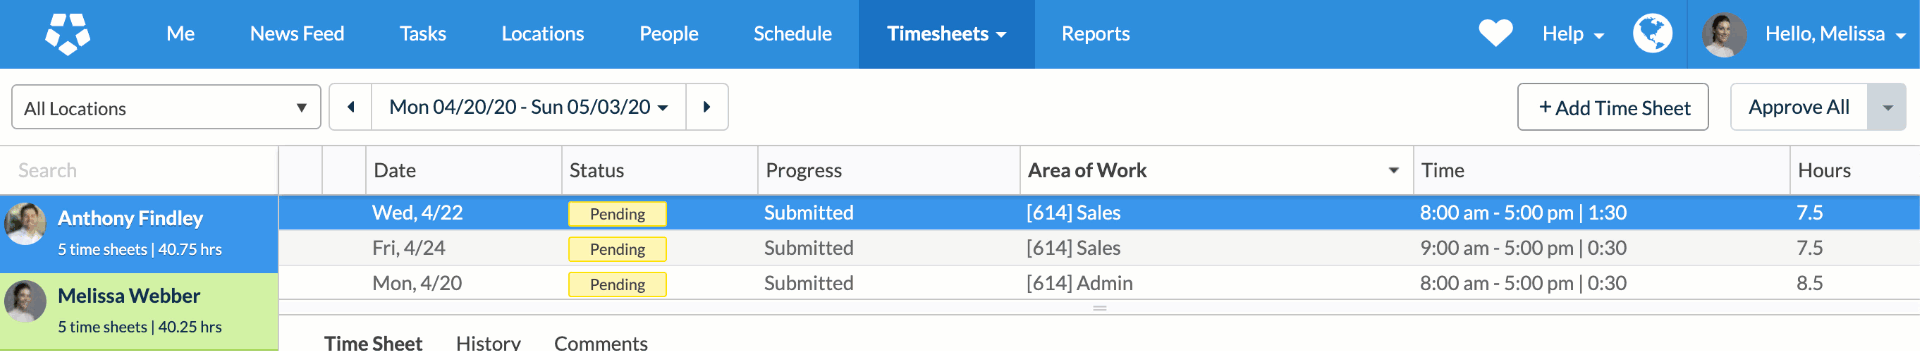 Approve_timesheets.gif